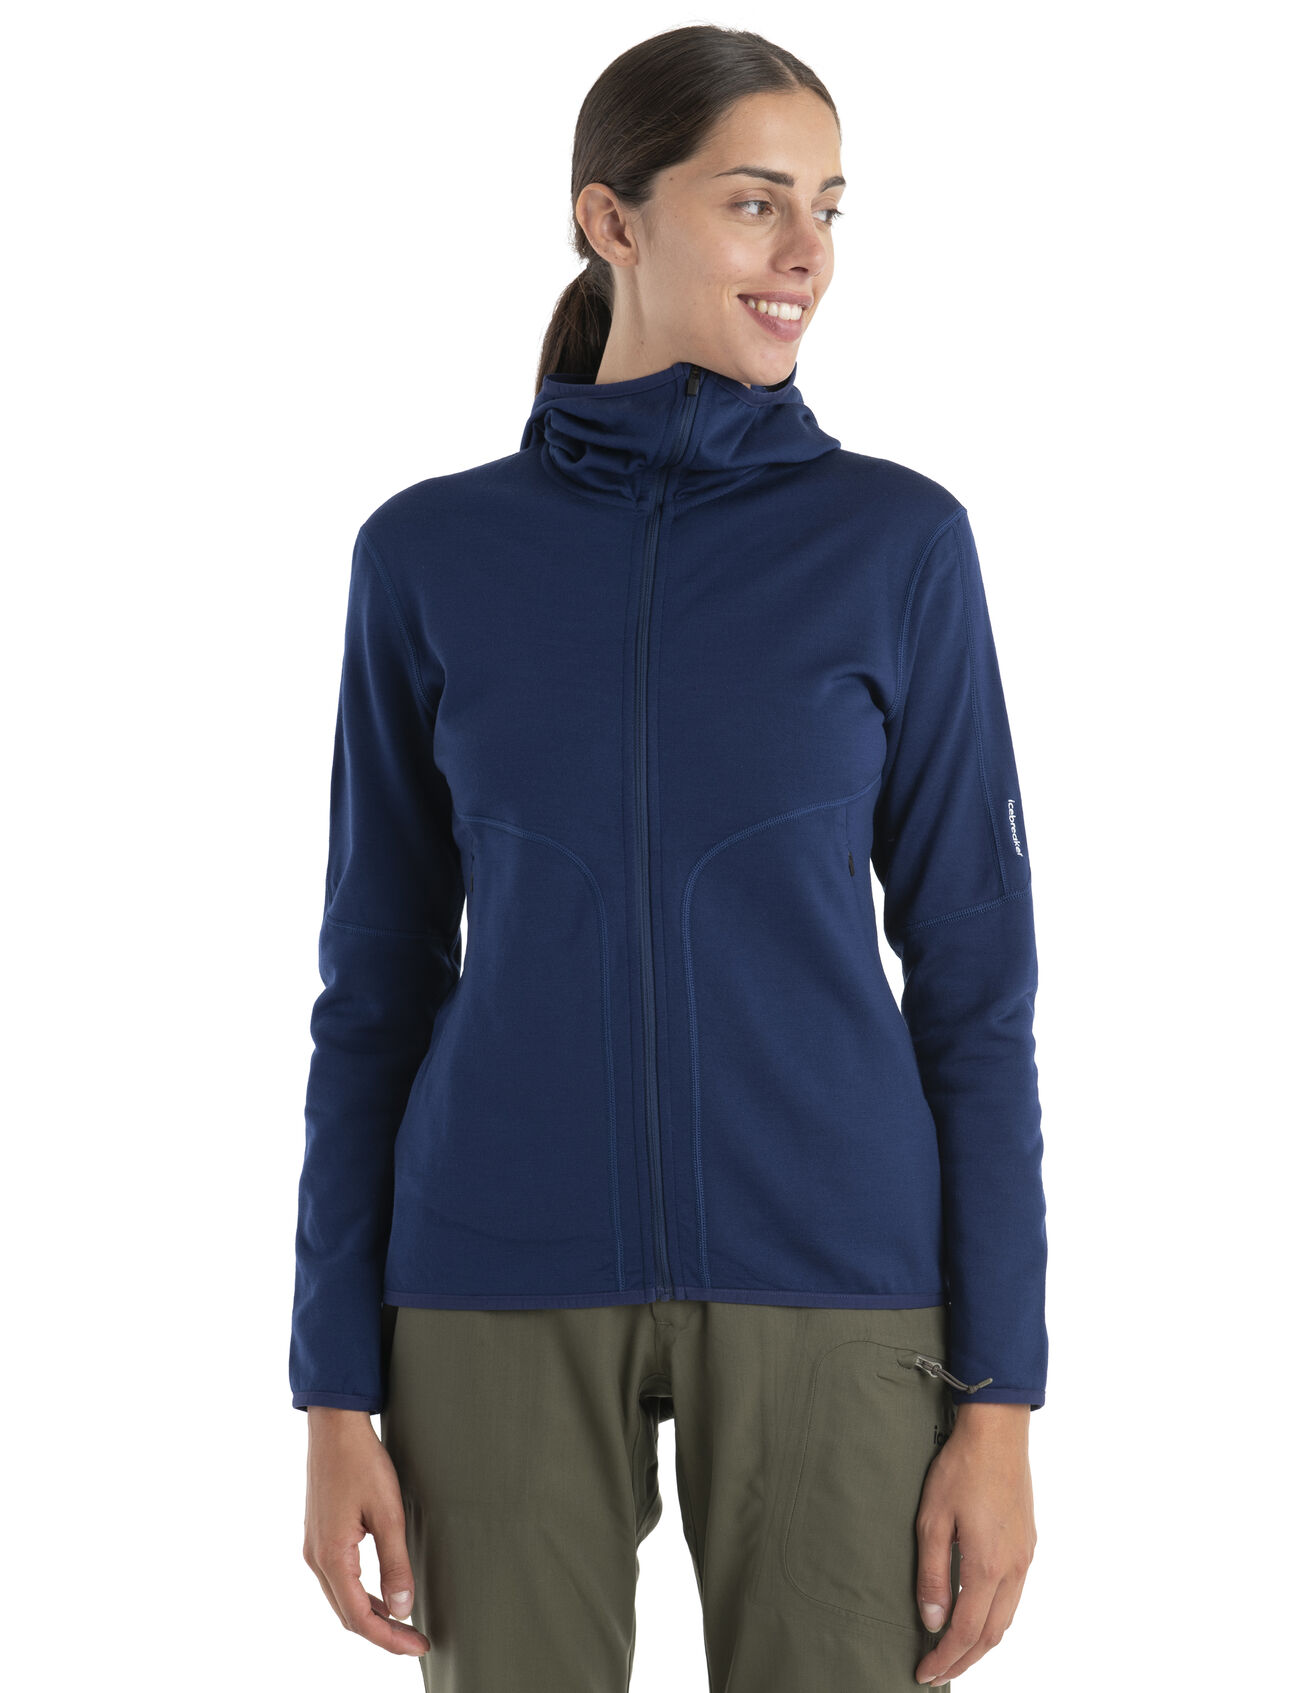 Womens Merino 560 RealFleece™ Elemental II Long Sleeve Zip Hood A heavyweight midlayer fleece ideal for cold-weather training, skiing or alpine climbing, the 560 Realfleece™ Elemental II Long Sleeve Zip Hood features 100% Merino wool to naturally insulate, breathe and regulate your temperature.